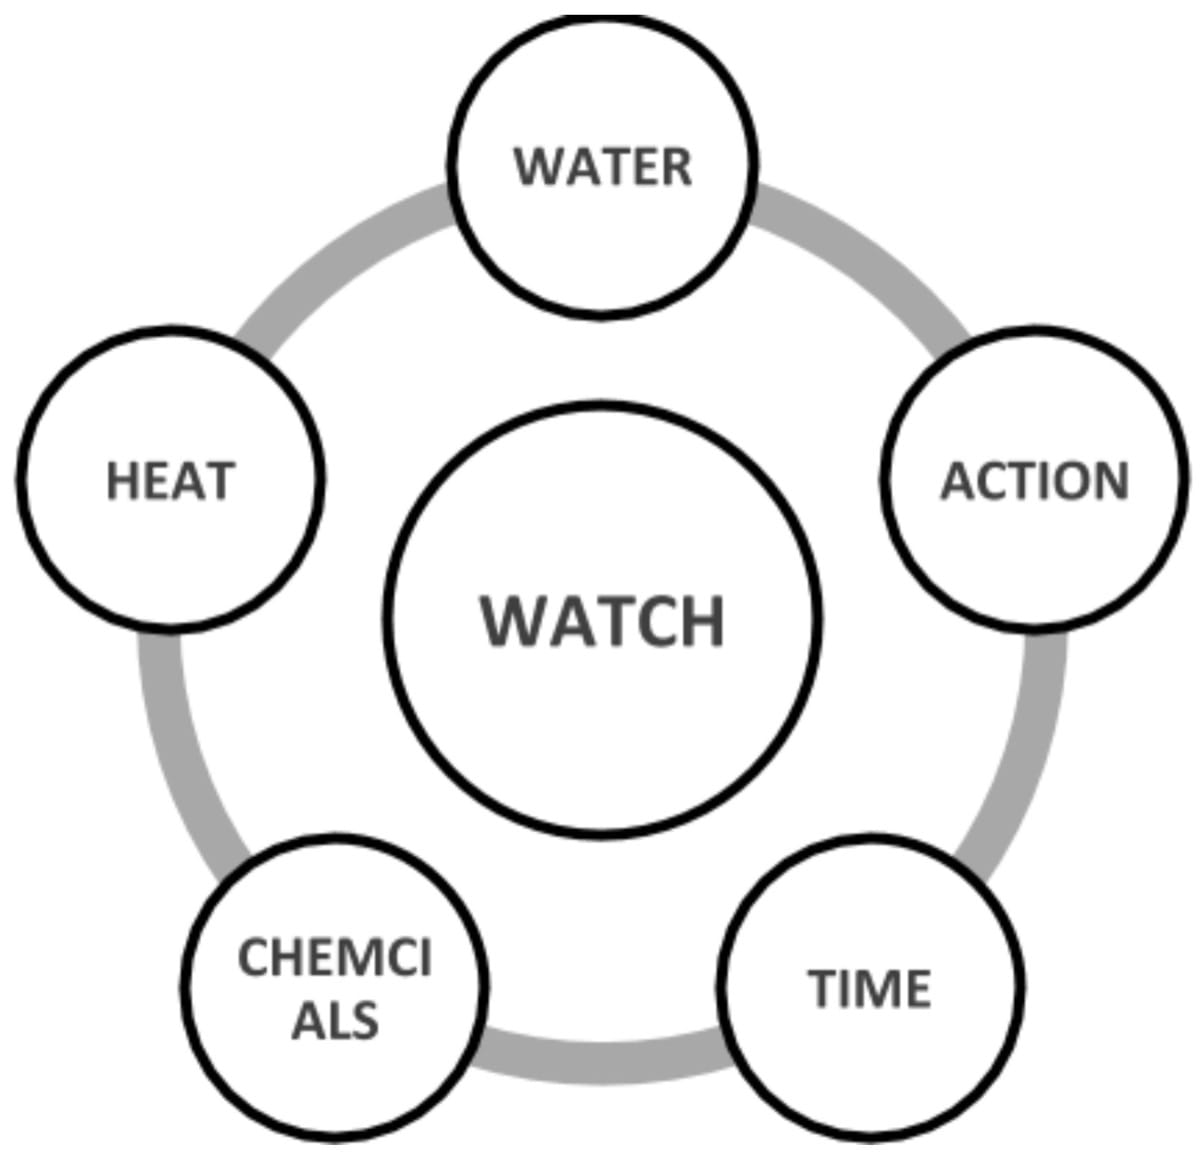 water, action, time, chemicals, heat